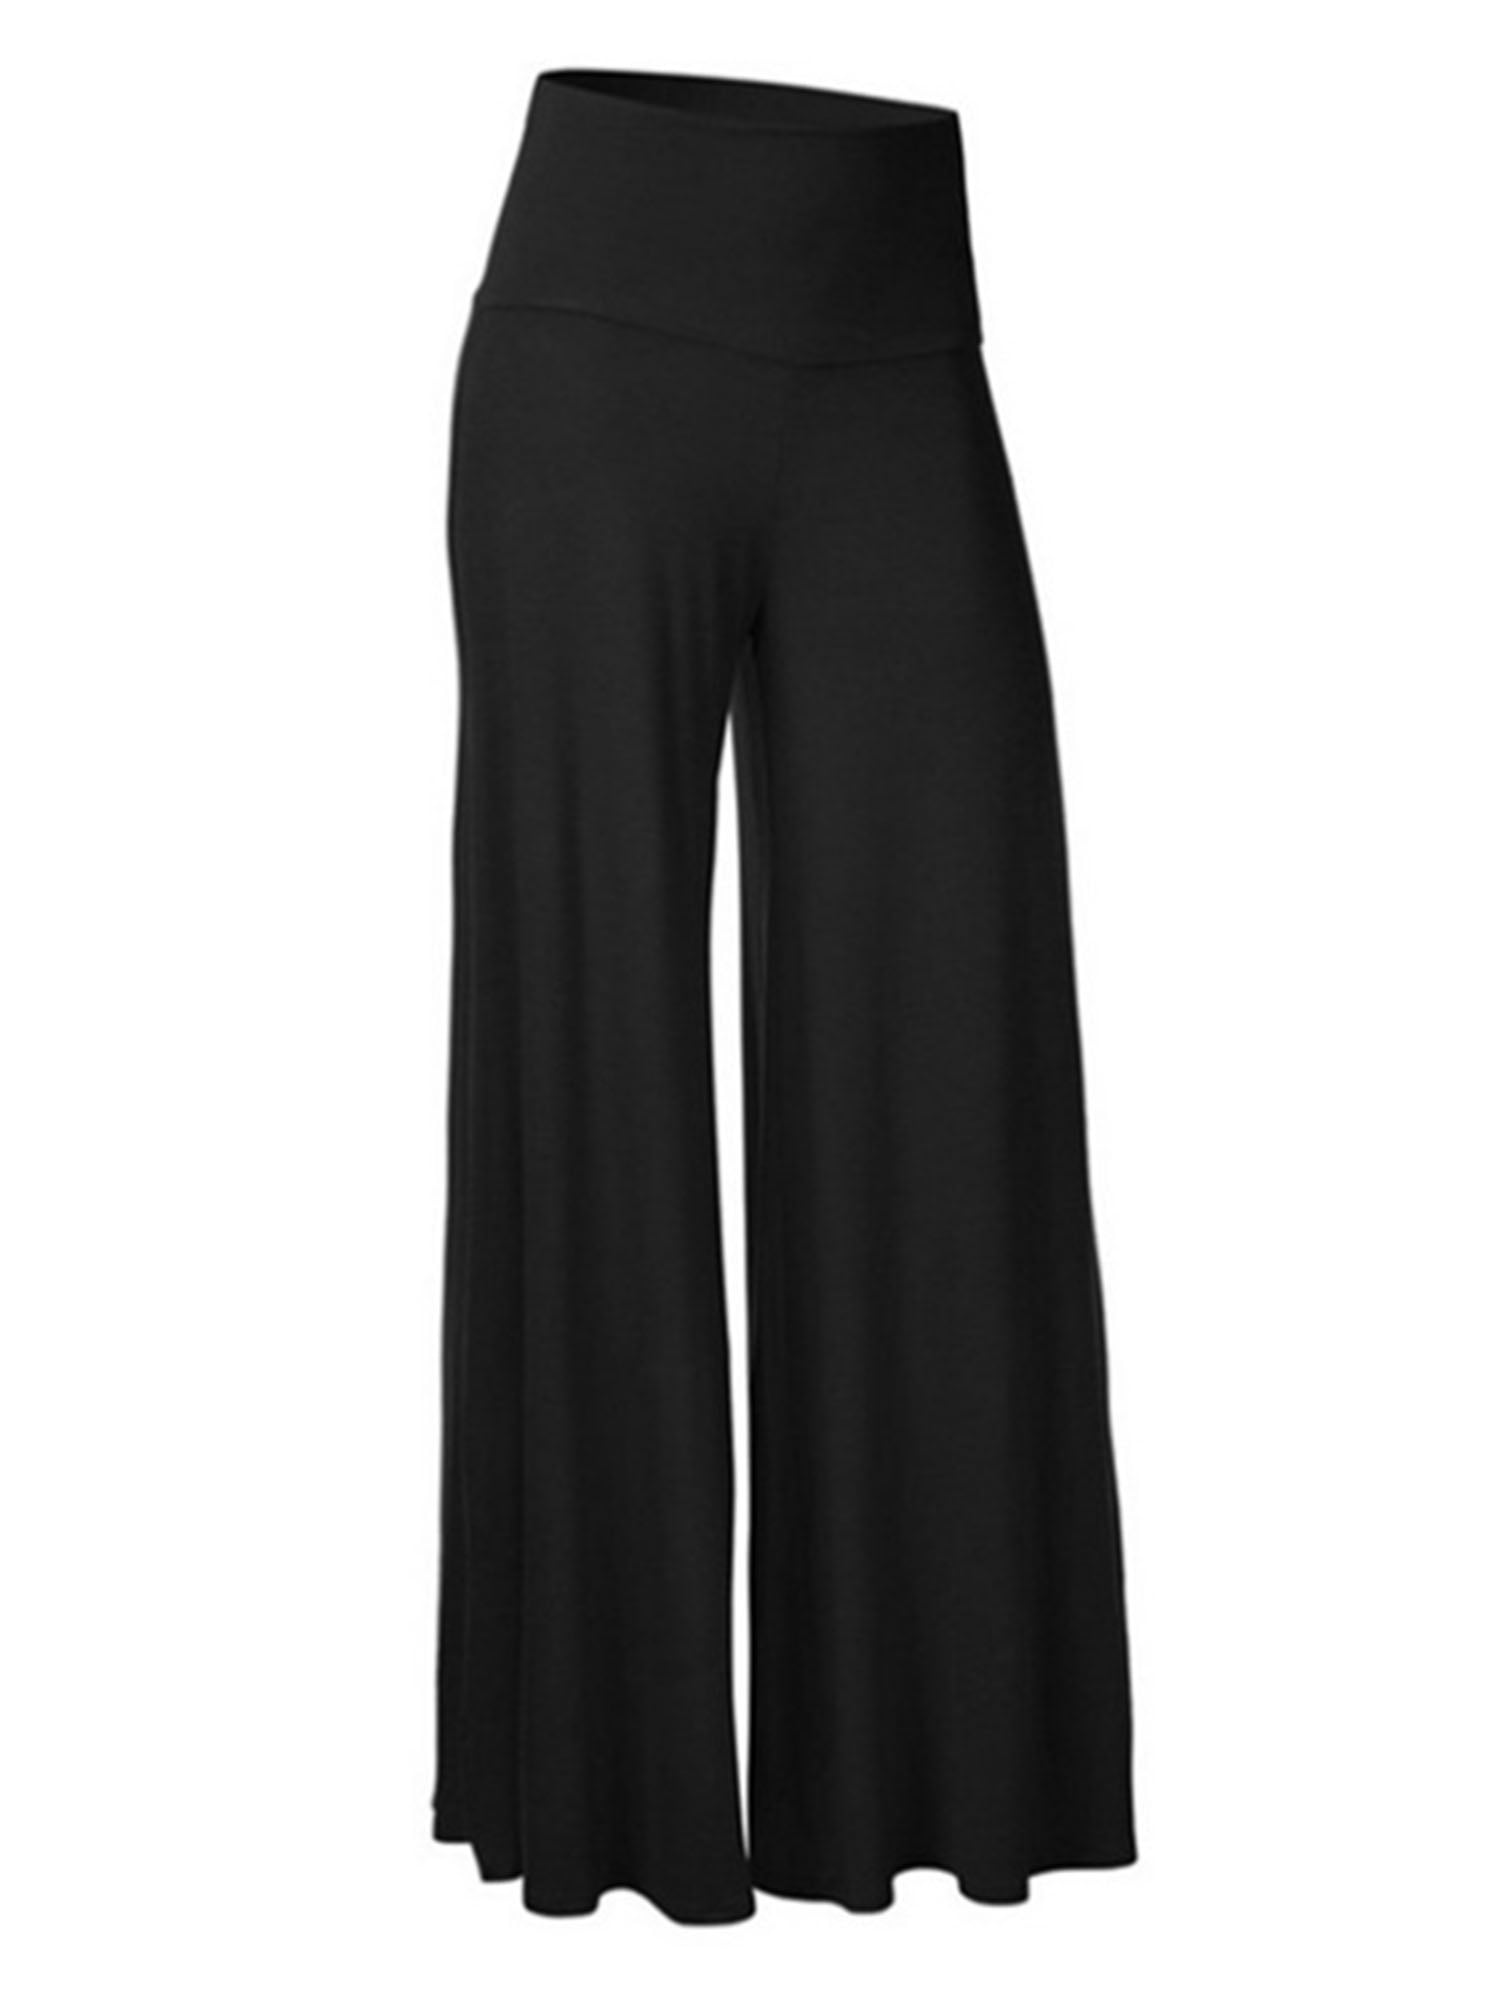 Plus Size Women's High Waist Soft Comfy Loungewear Pant Stretchy Flare ...